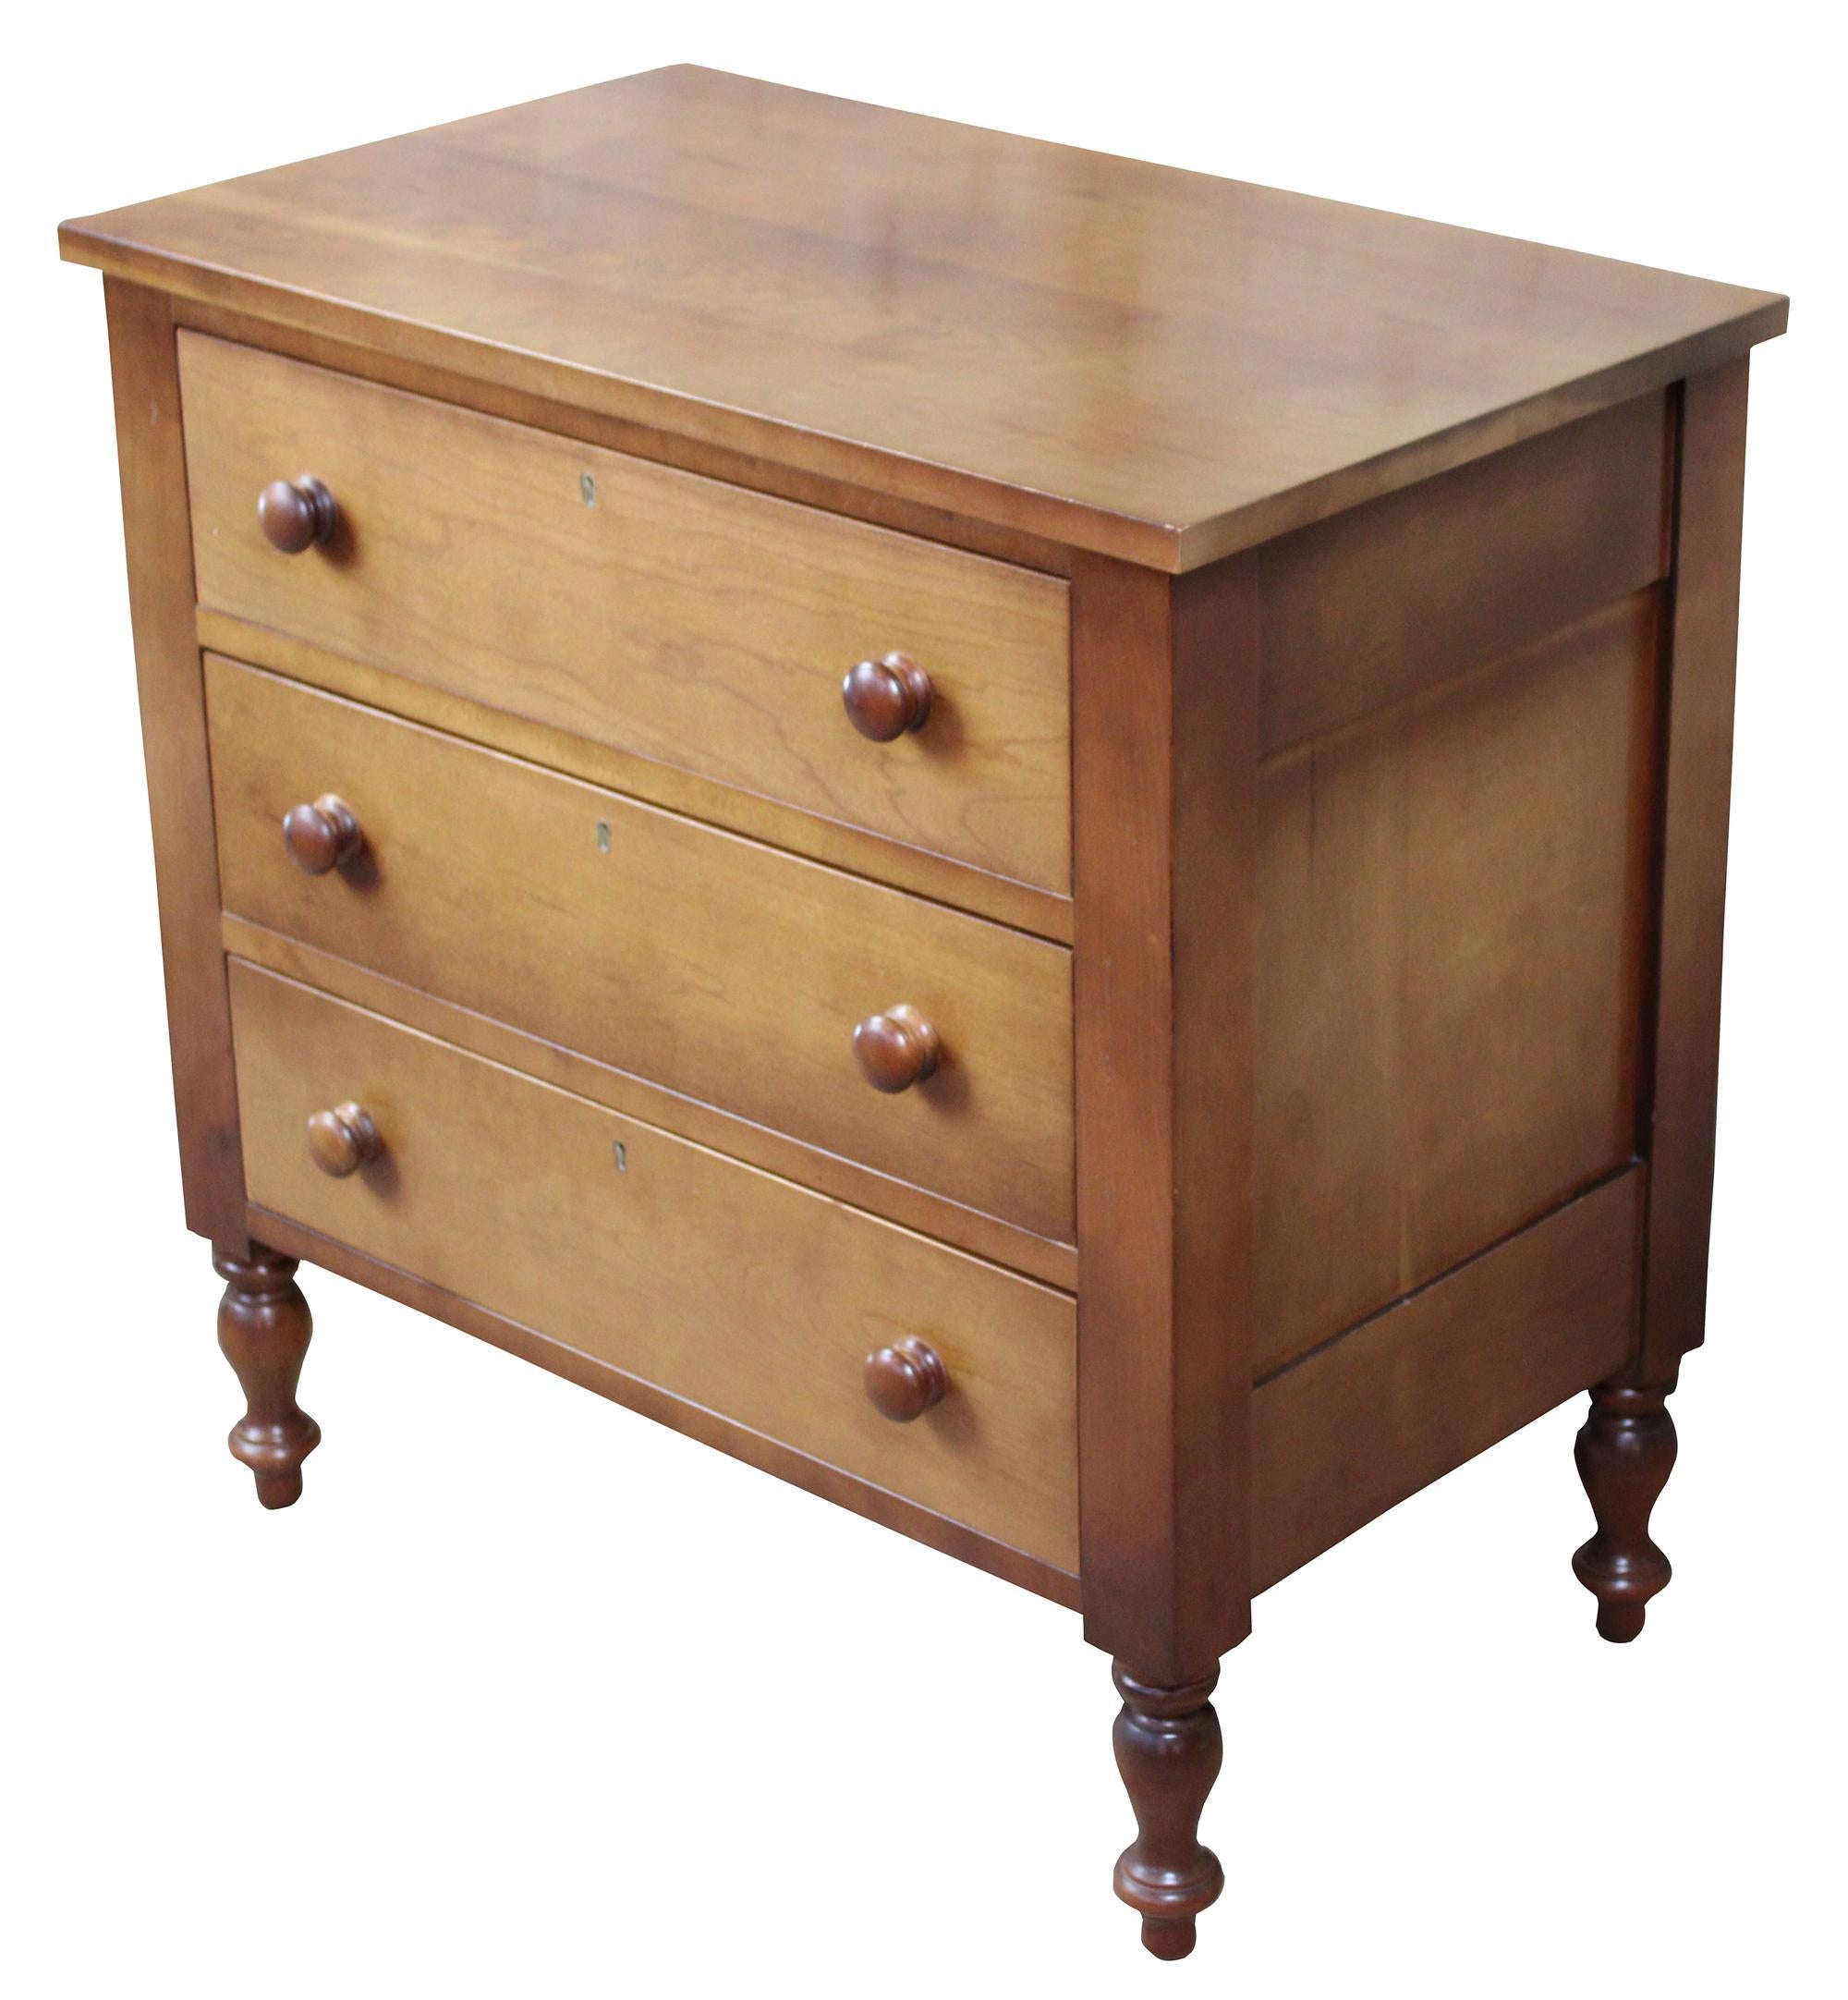 American Colonial Cassady Furniture Early American Cherry 3-Drawer Dresser Chest Nightstand